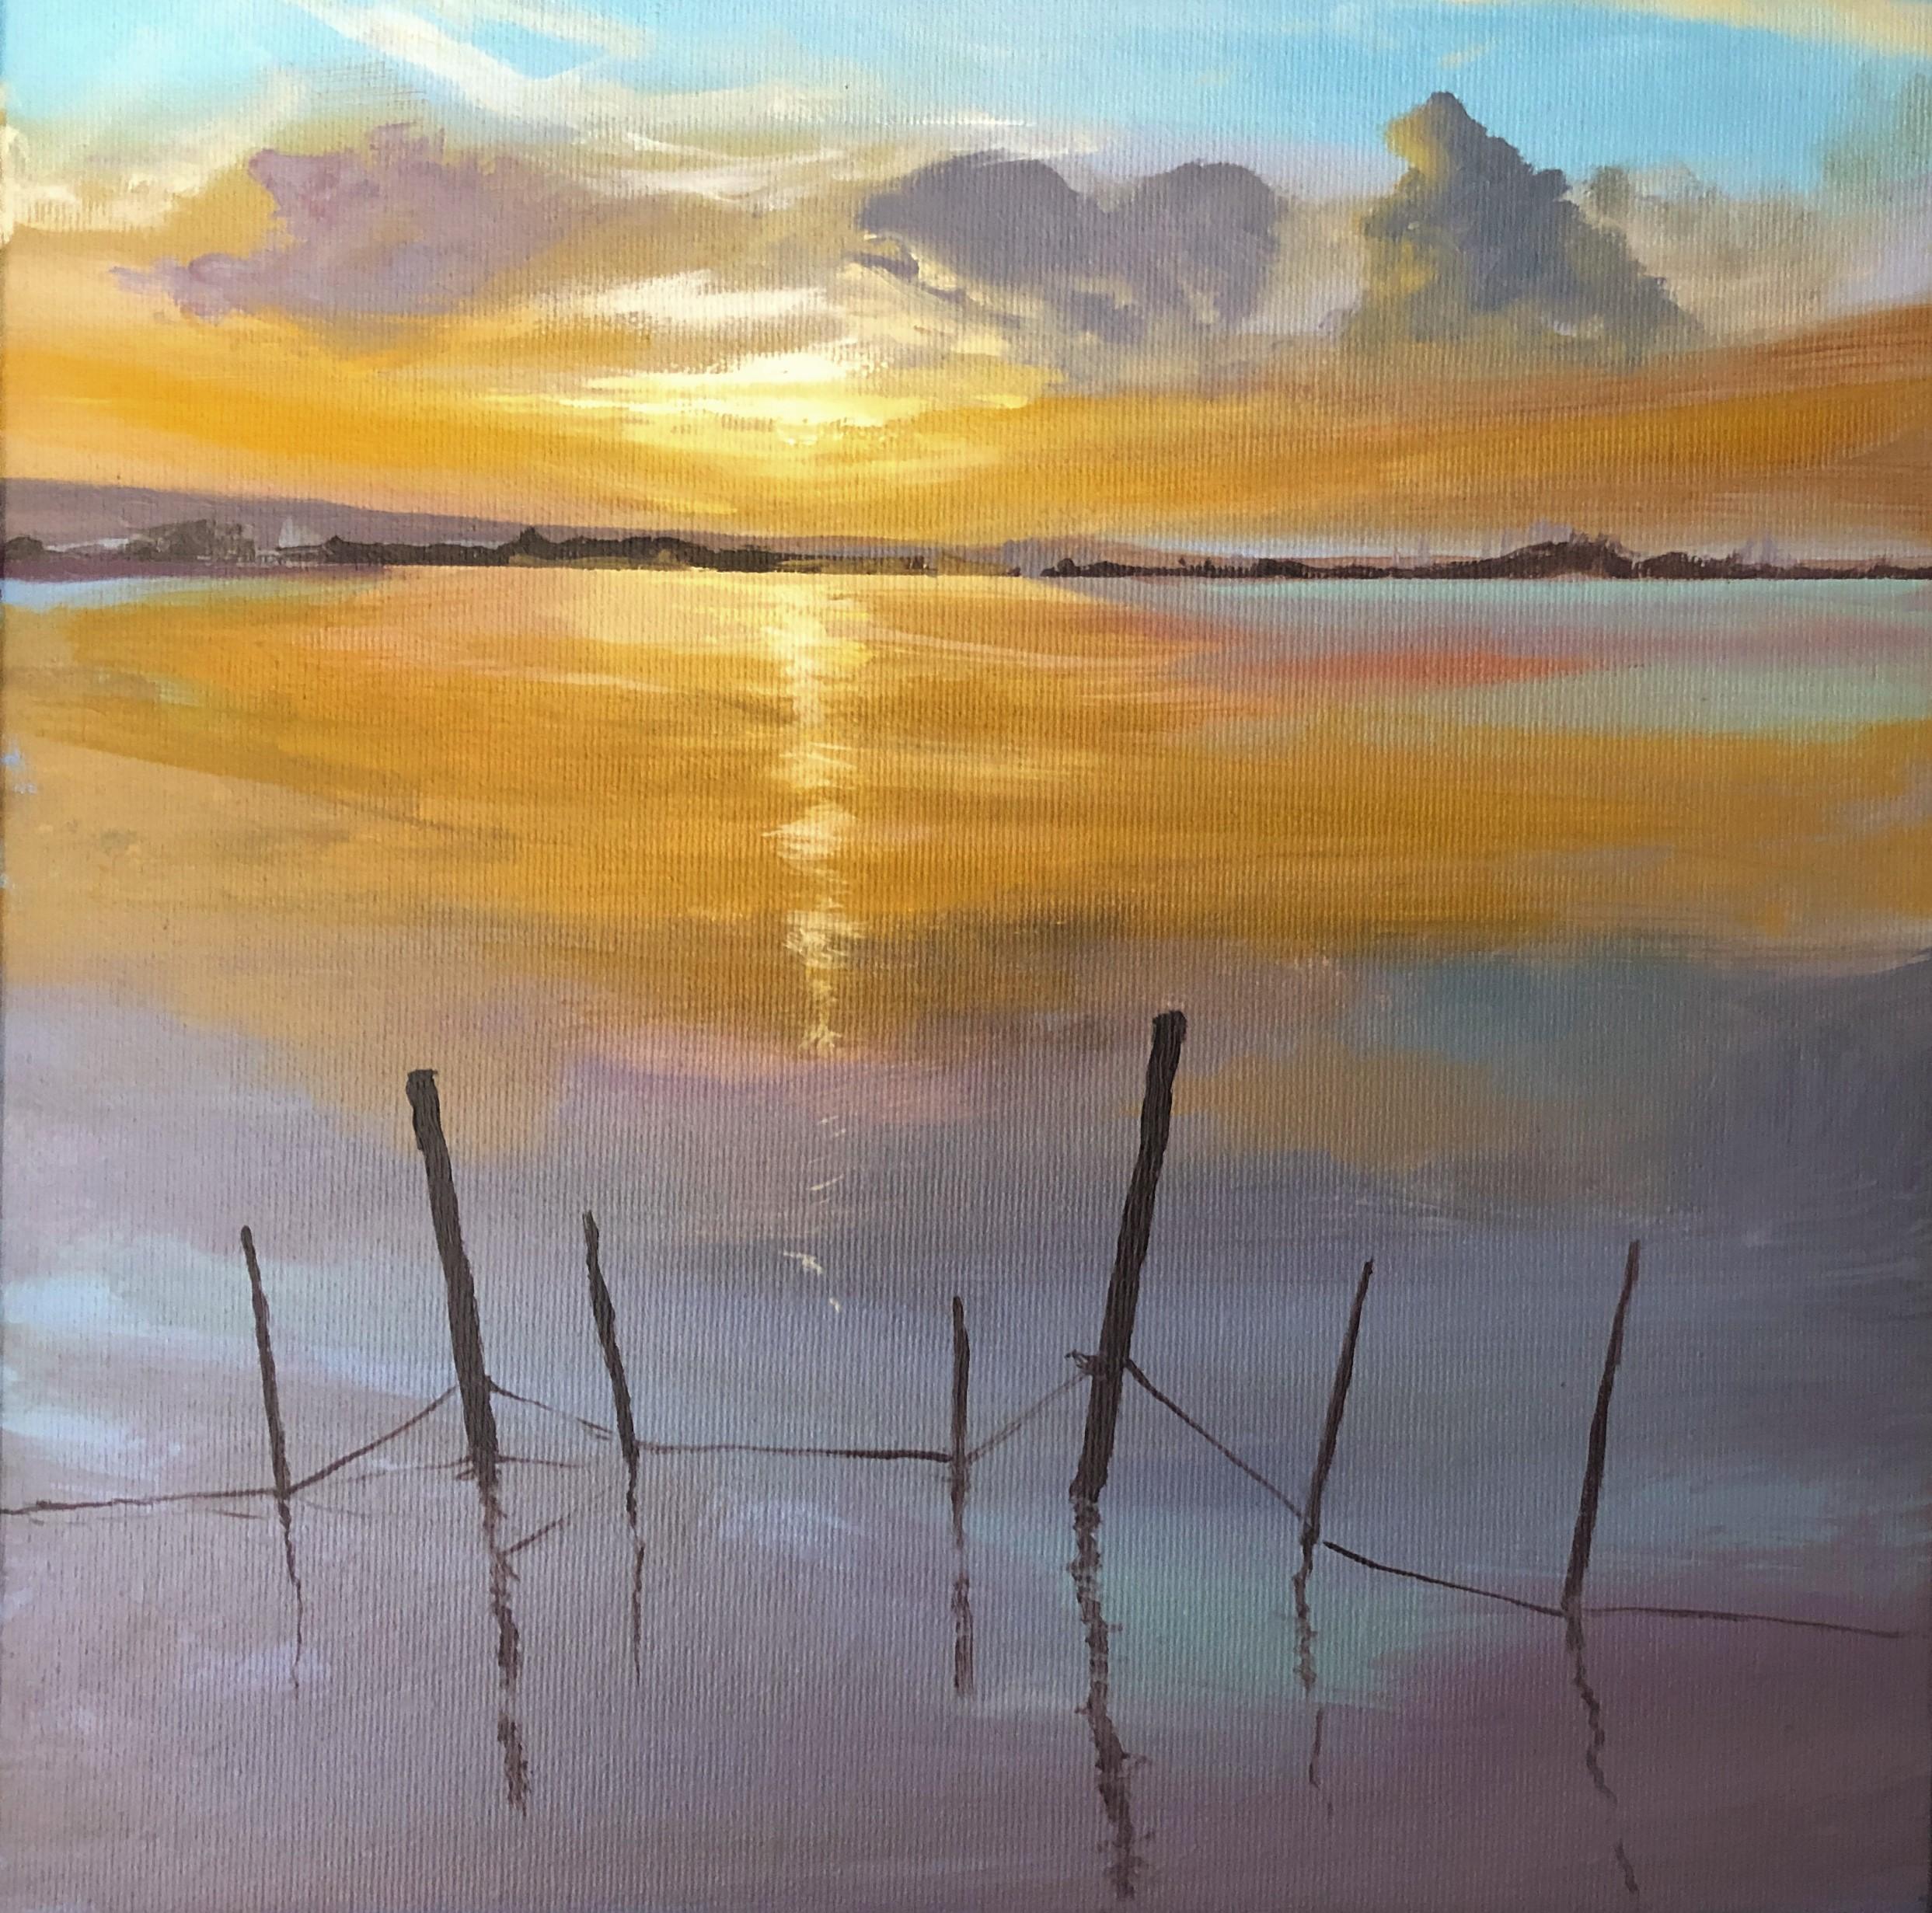 Alberto Biesok Landscape Painting - Sun in the Albufera of Valencia Spain oil on canvas painting landscape